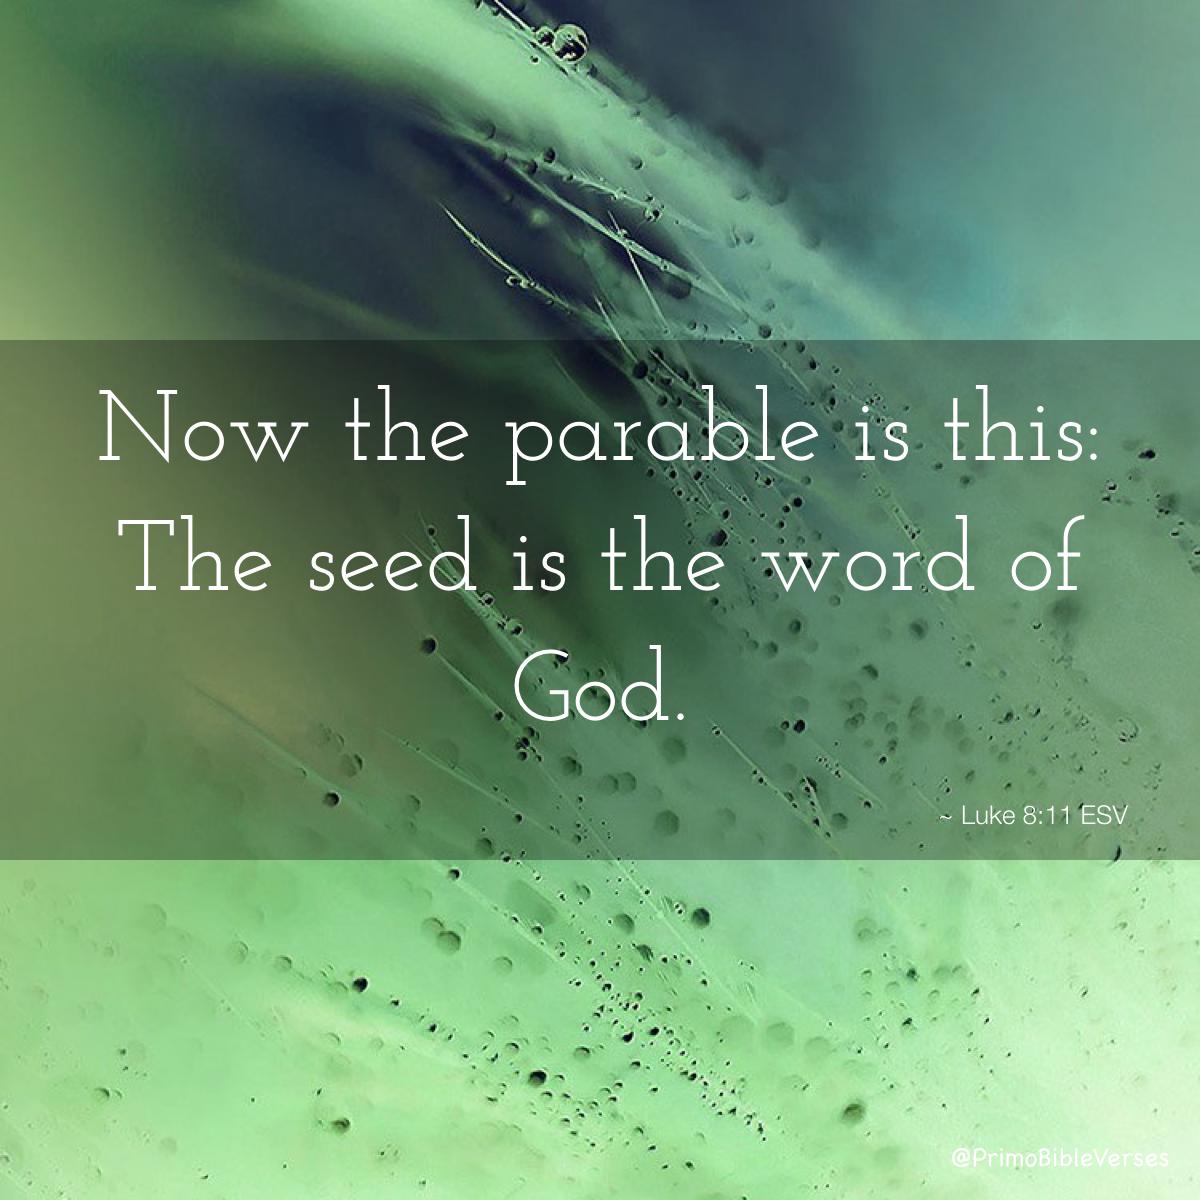 seed-is-the-word-of-God.jpg